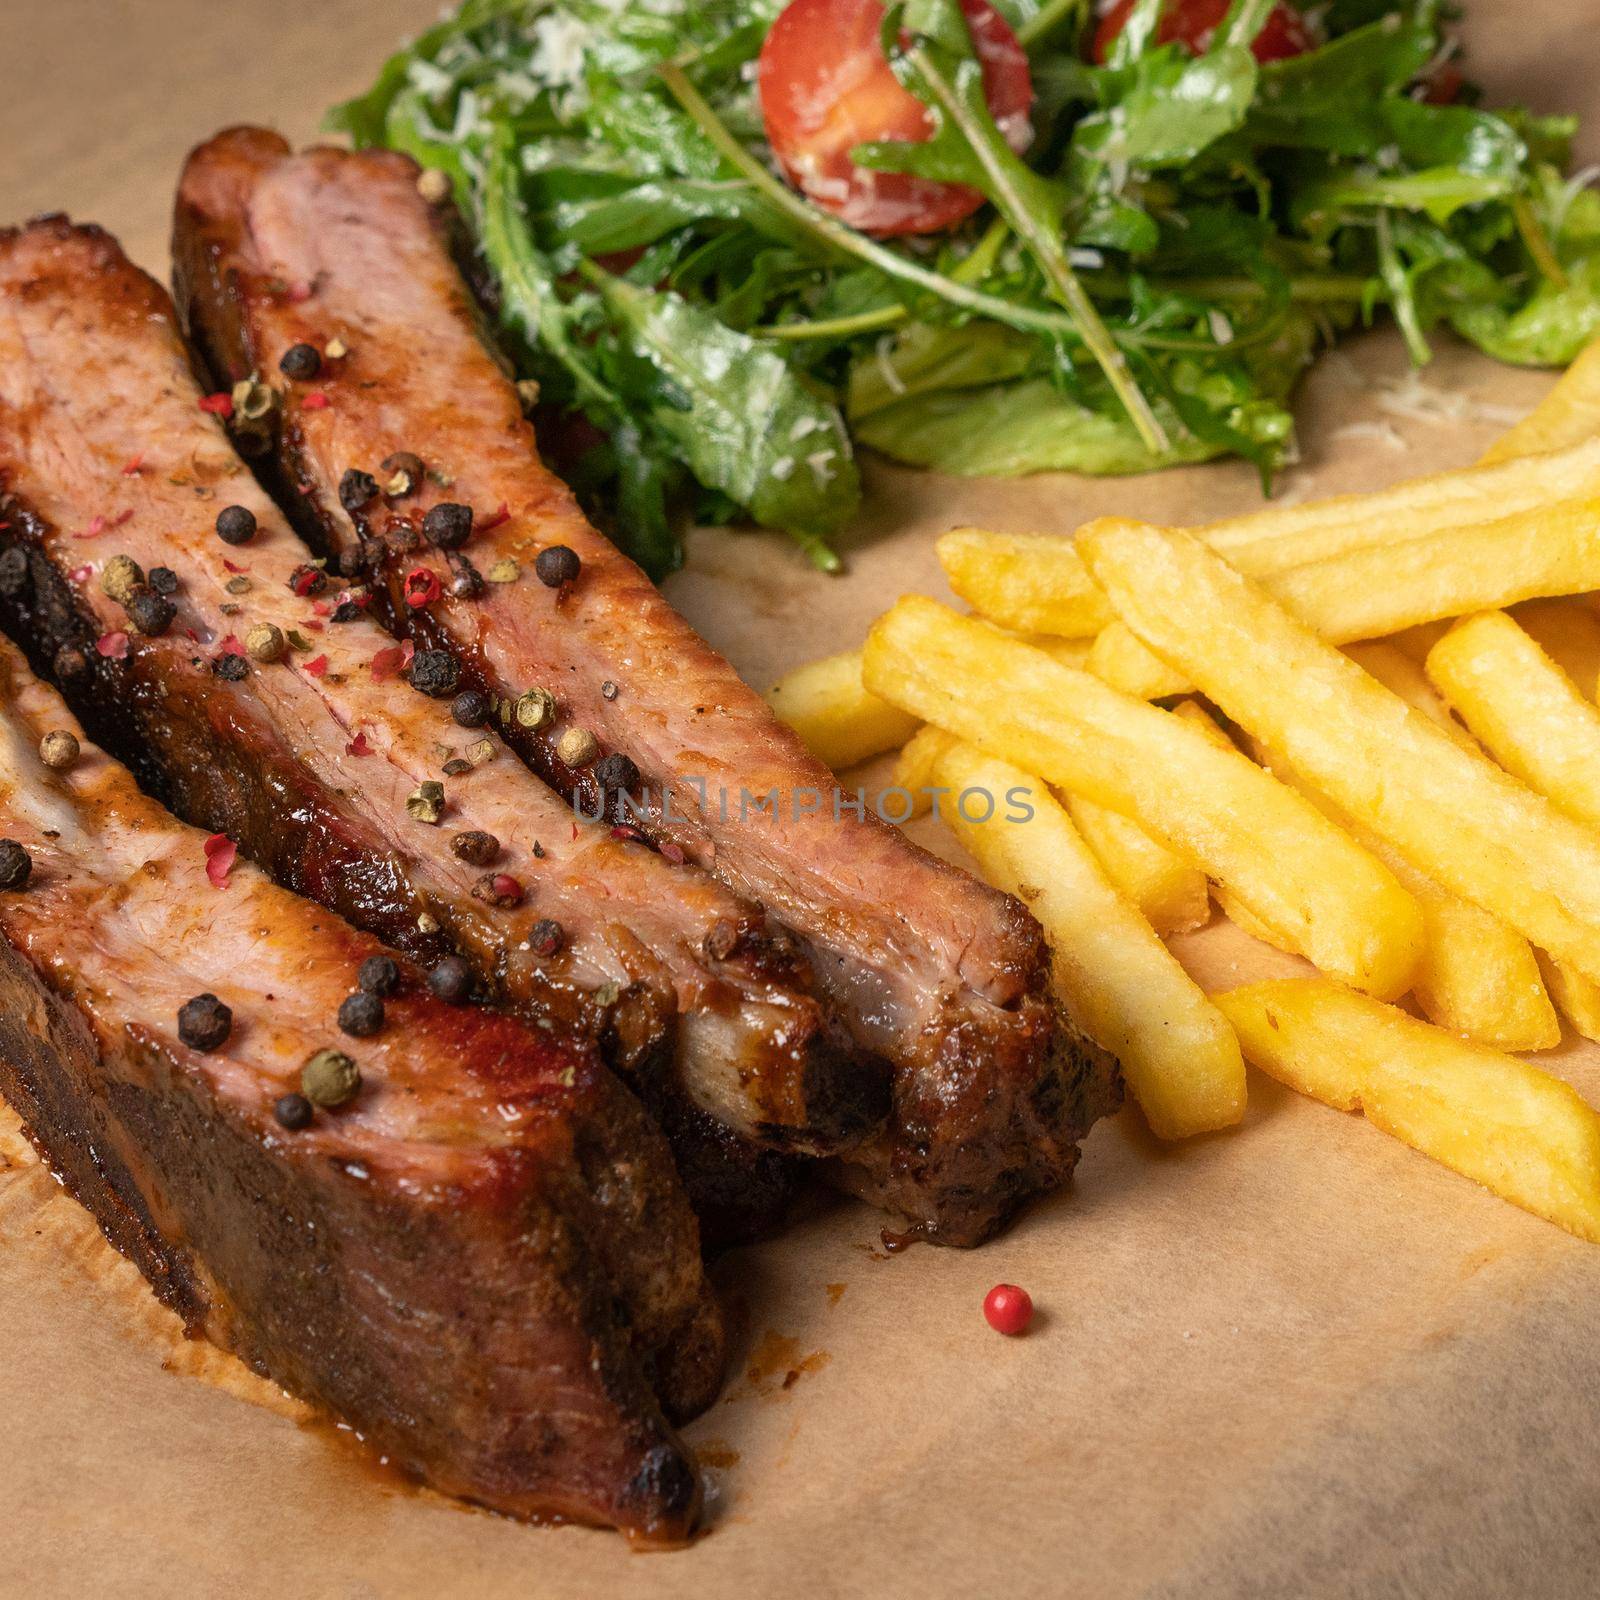 BBQ spare ribs served with French fries and arugula salad with cherry tomatoes and parmesan cheese served on board covered with food grade paper. Restaurant concept. Square cropped image by LipikStockMedia